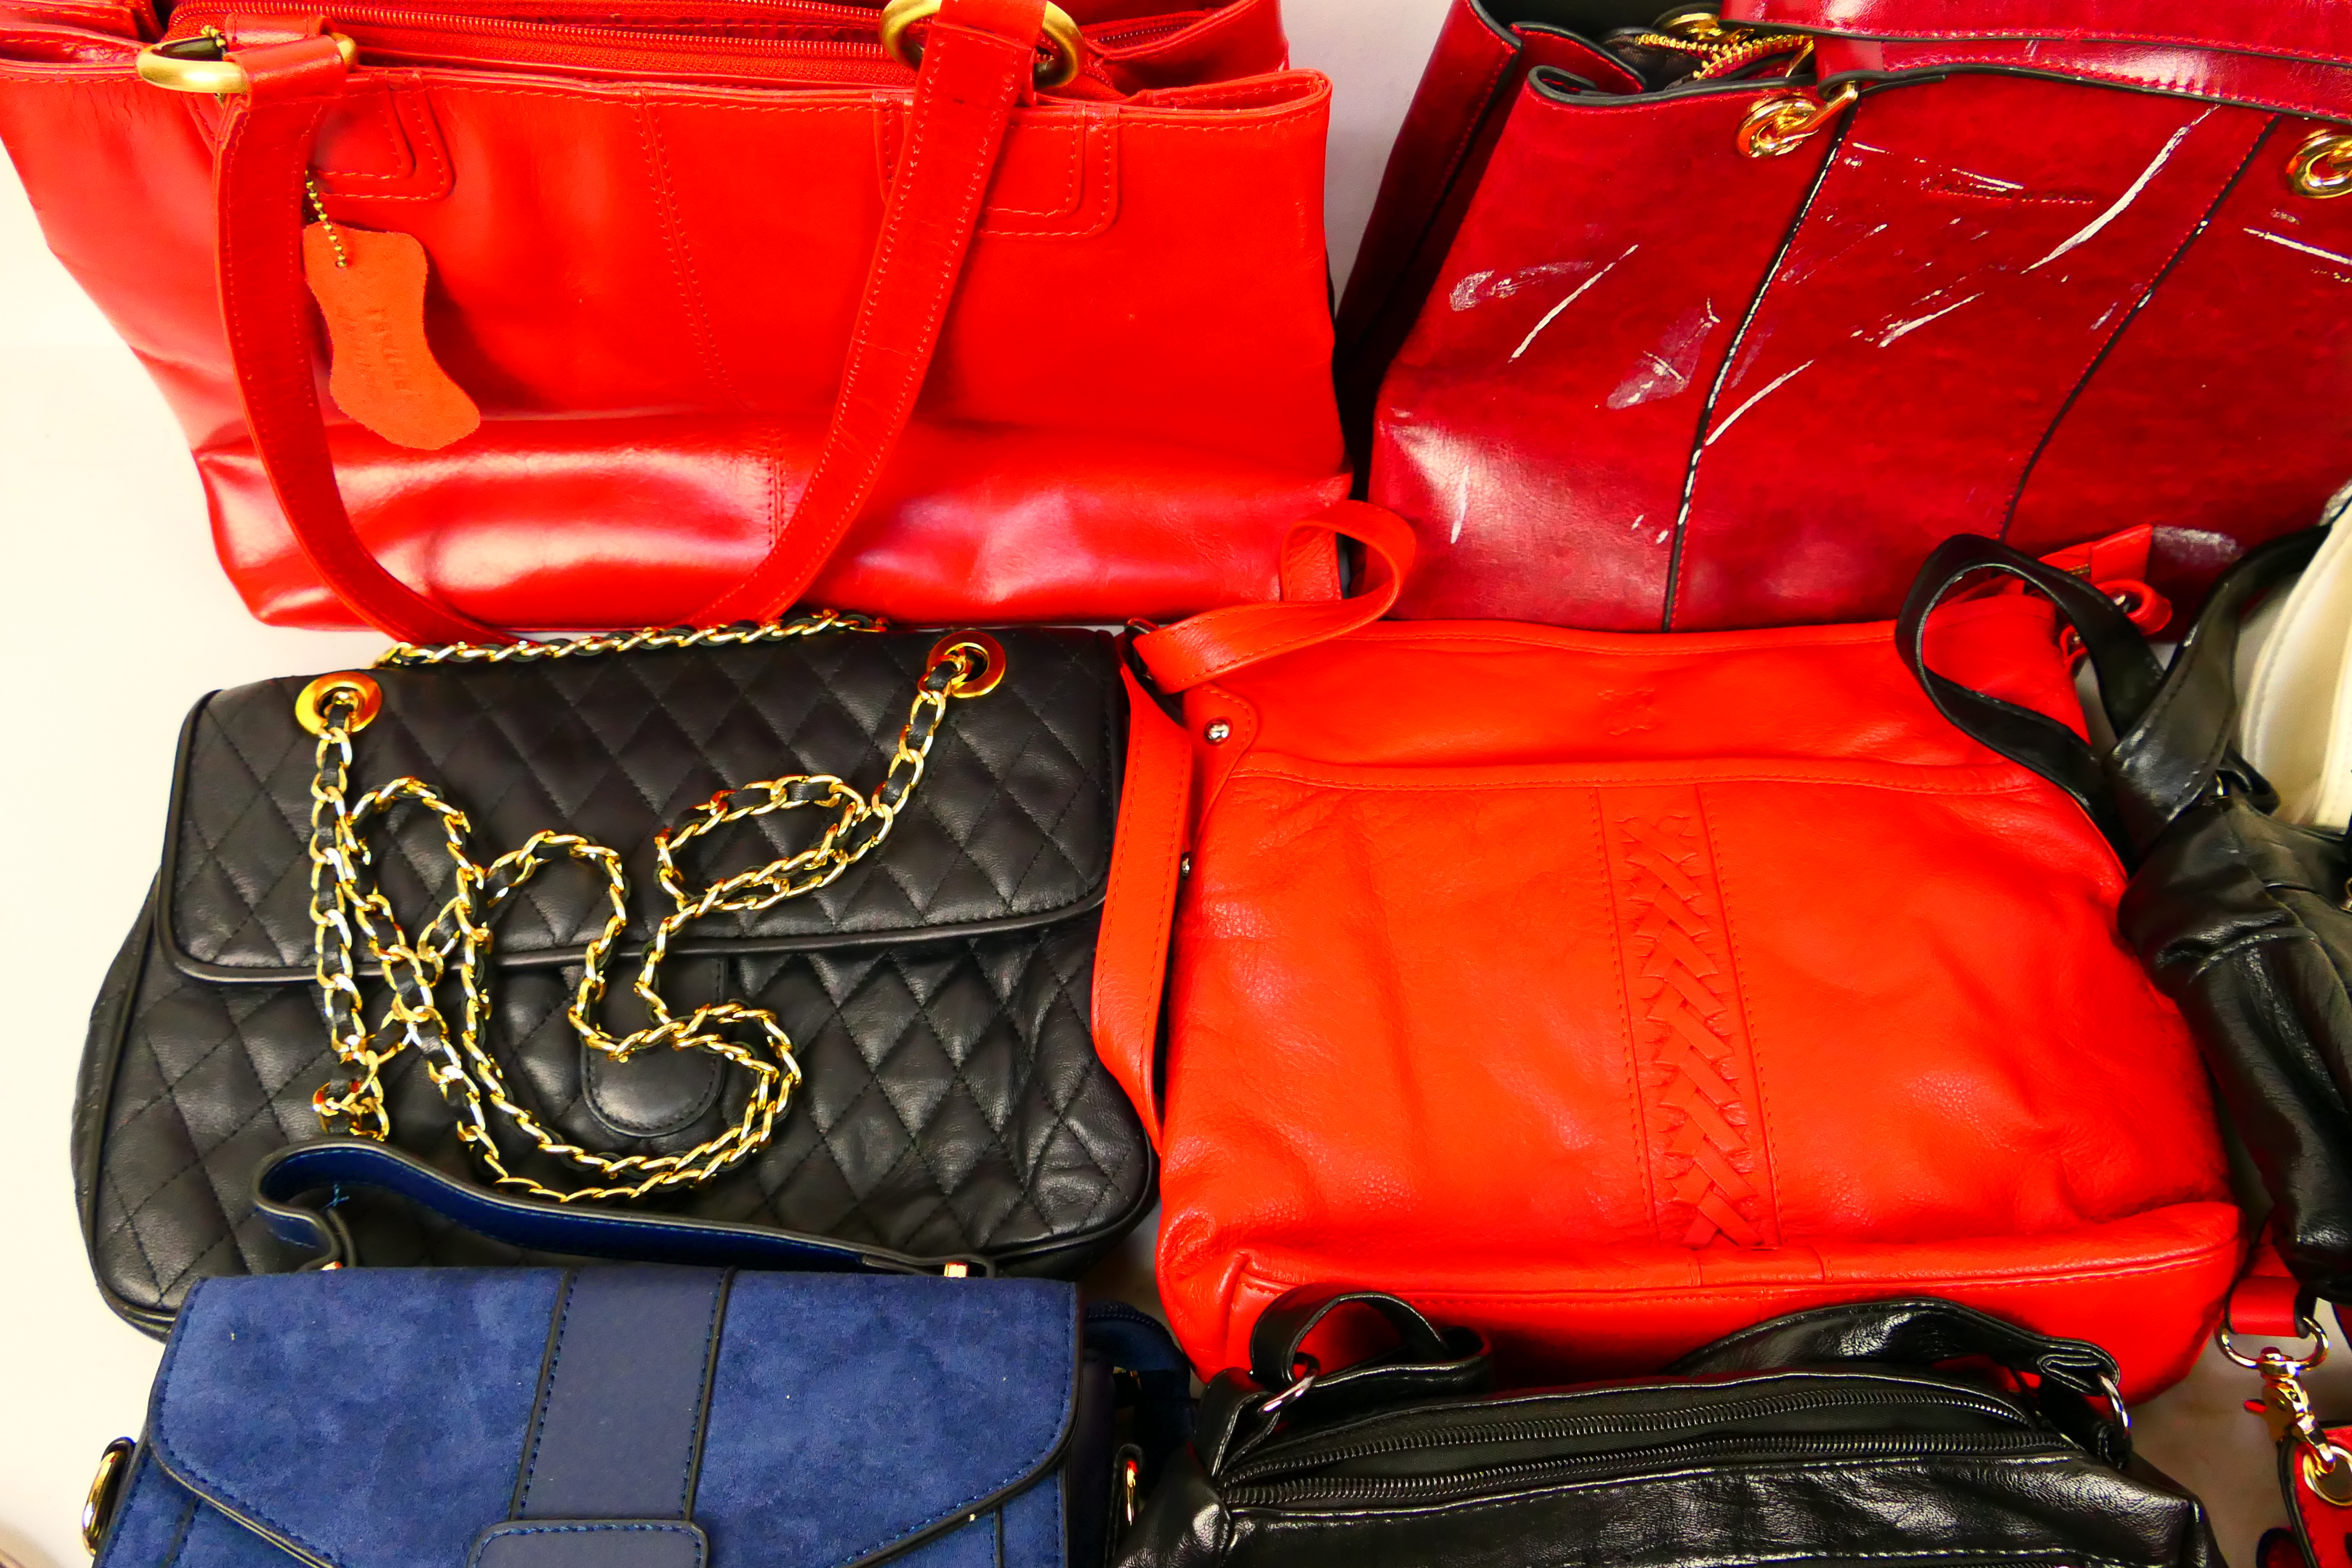 A job lot of predominantly unmarked handbags to include colours of dark blue, dark red, black, - Image 4 of 6